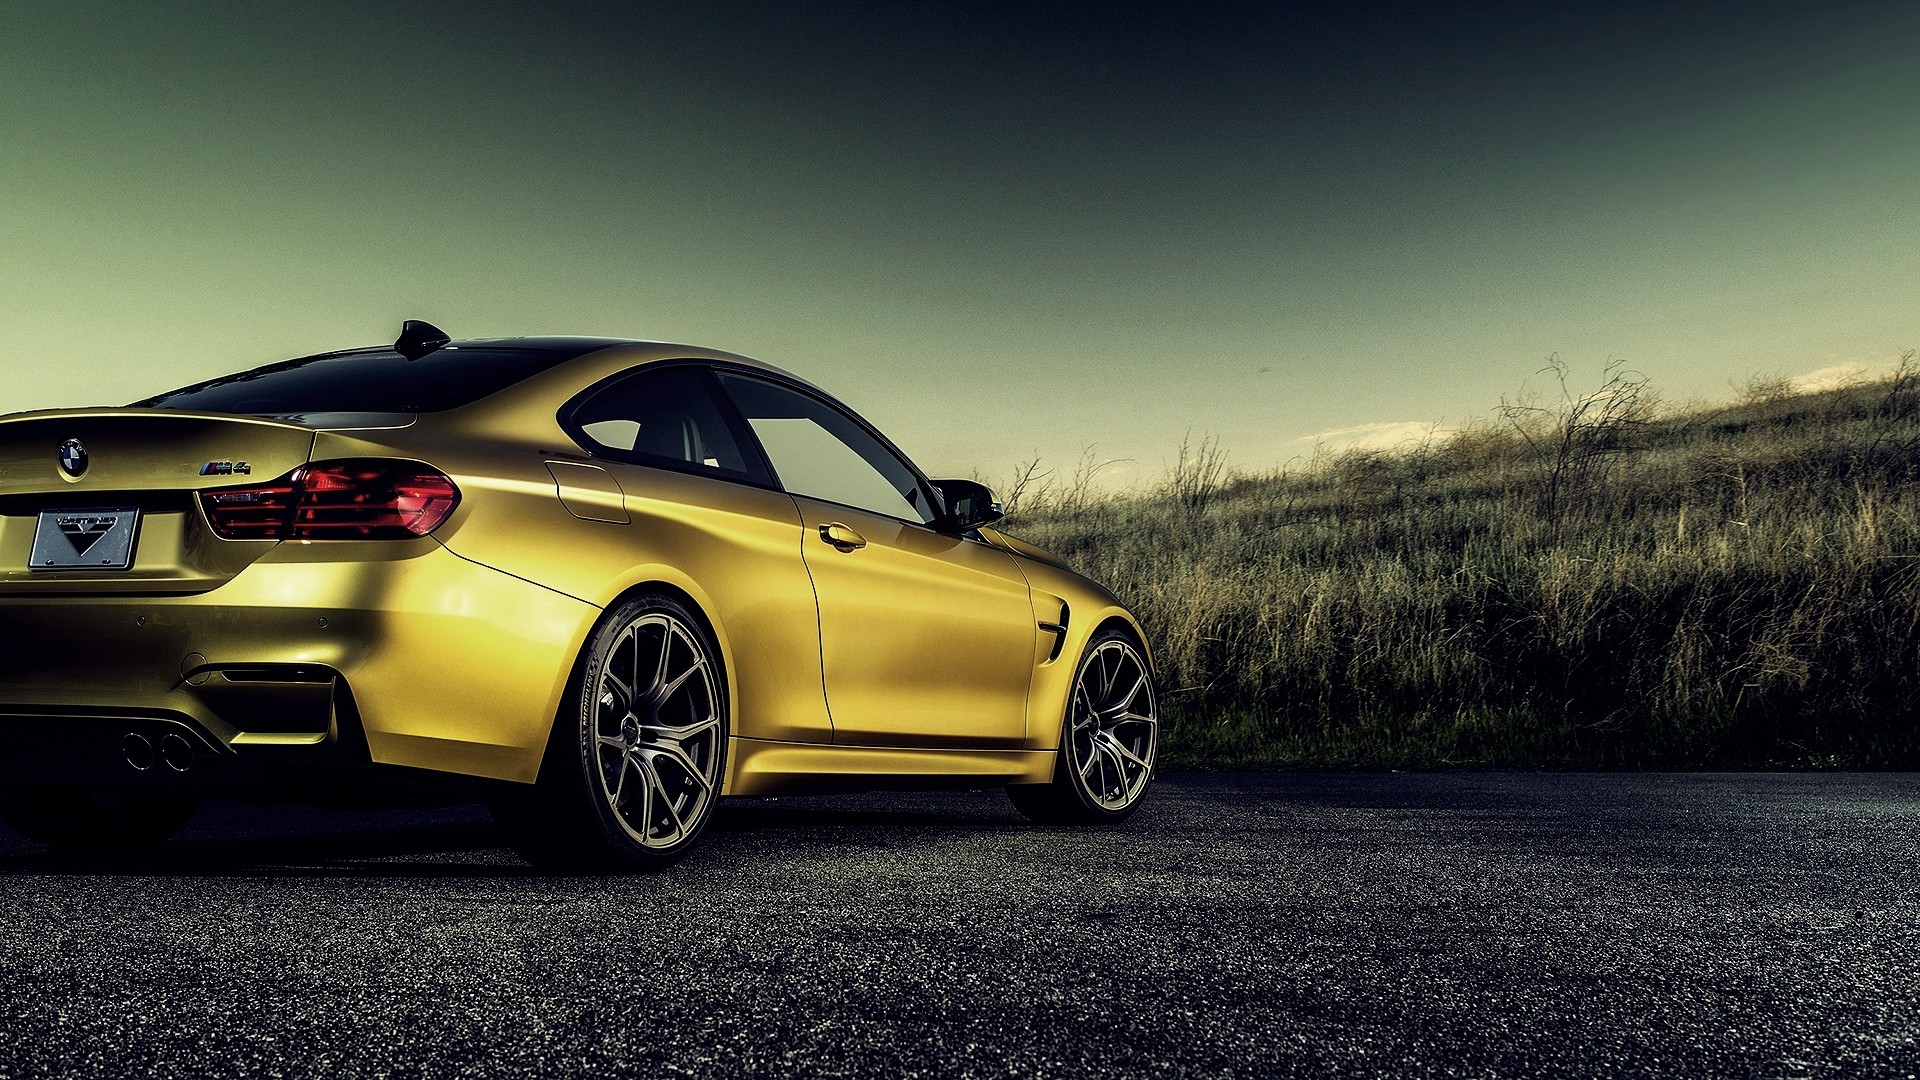 BMW, M4, BMW F82 M4 Wallpapers HD / Desktop and Mobile Backgrounds